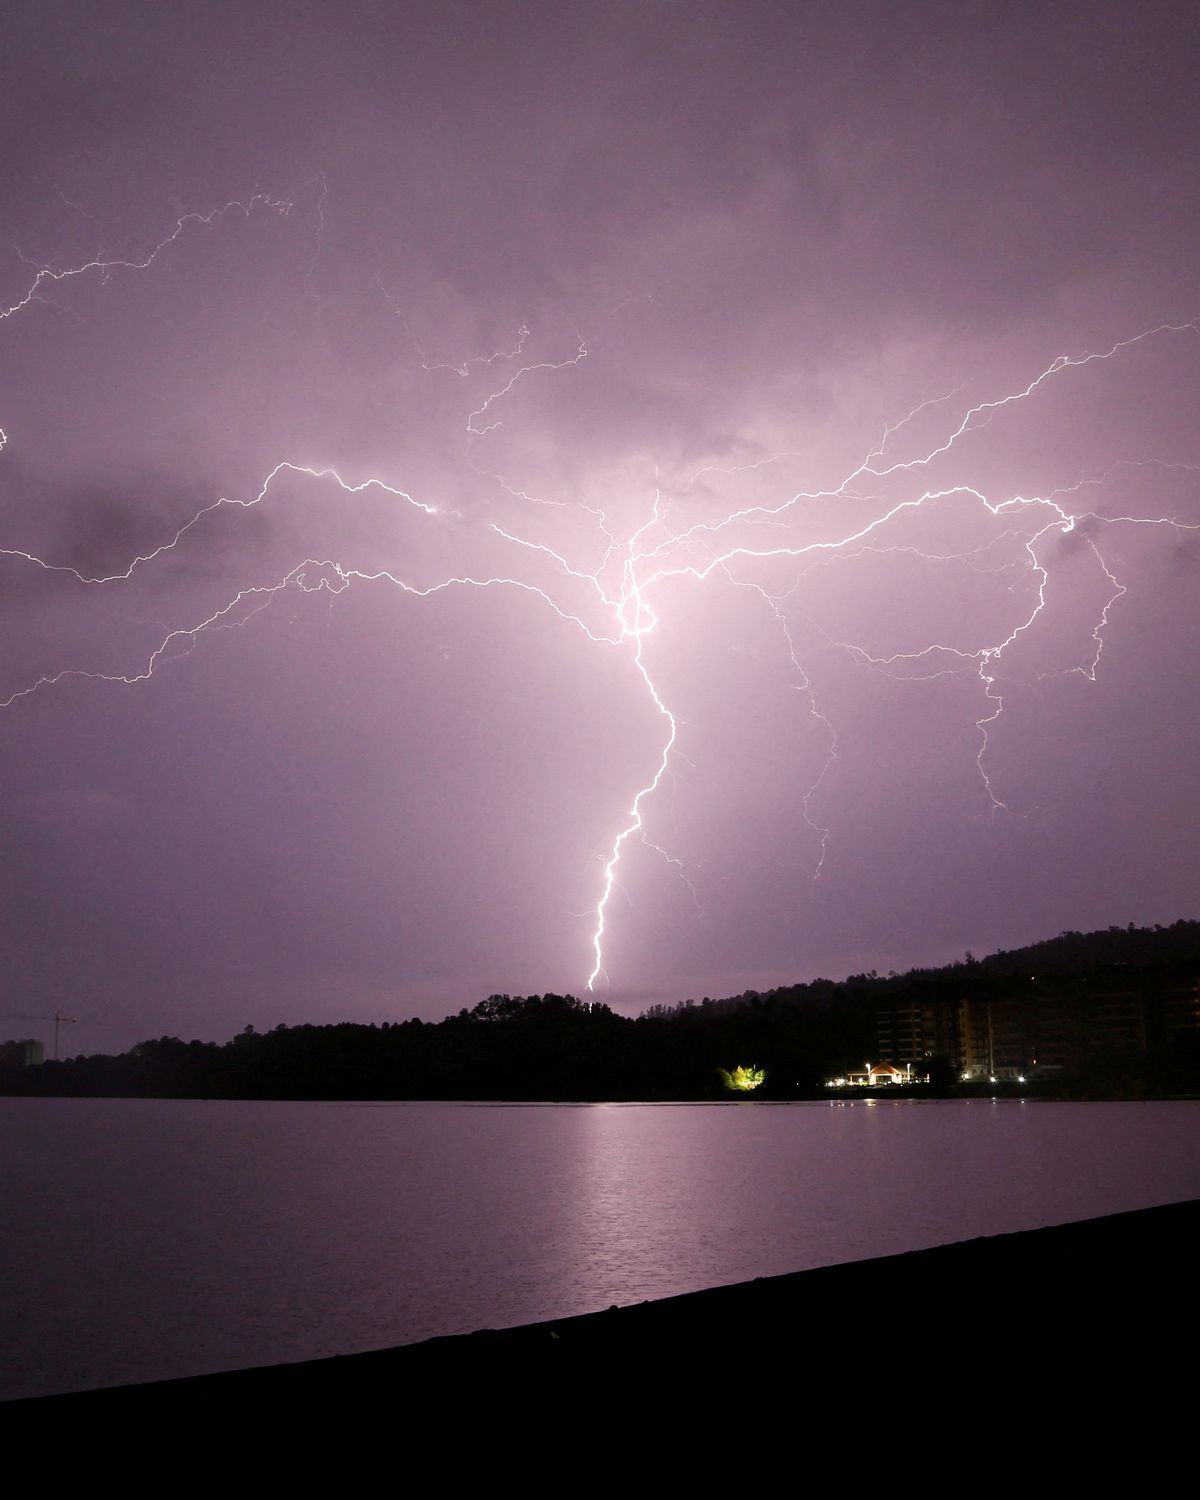 U.S. lightning bolt leaps into record books at 477 miles long